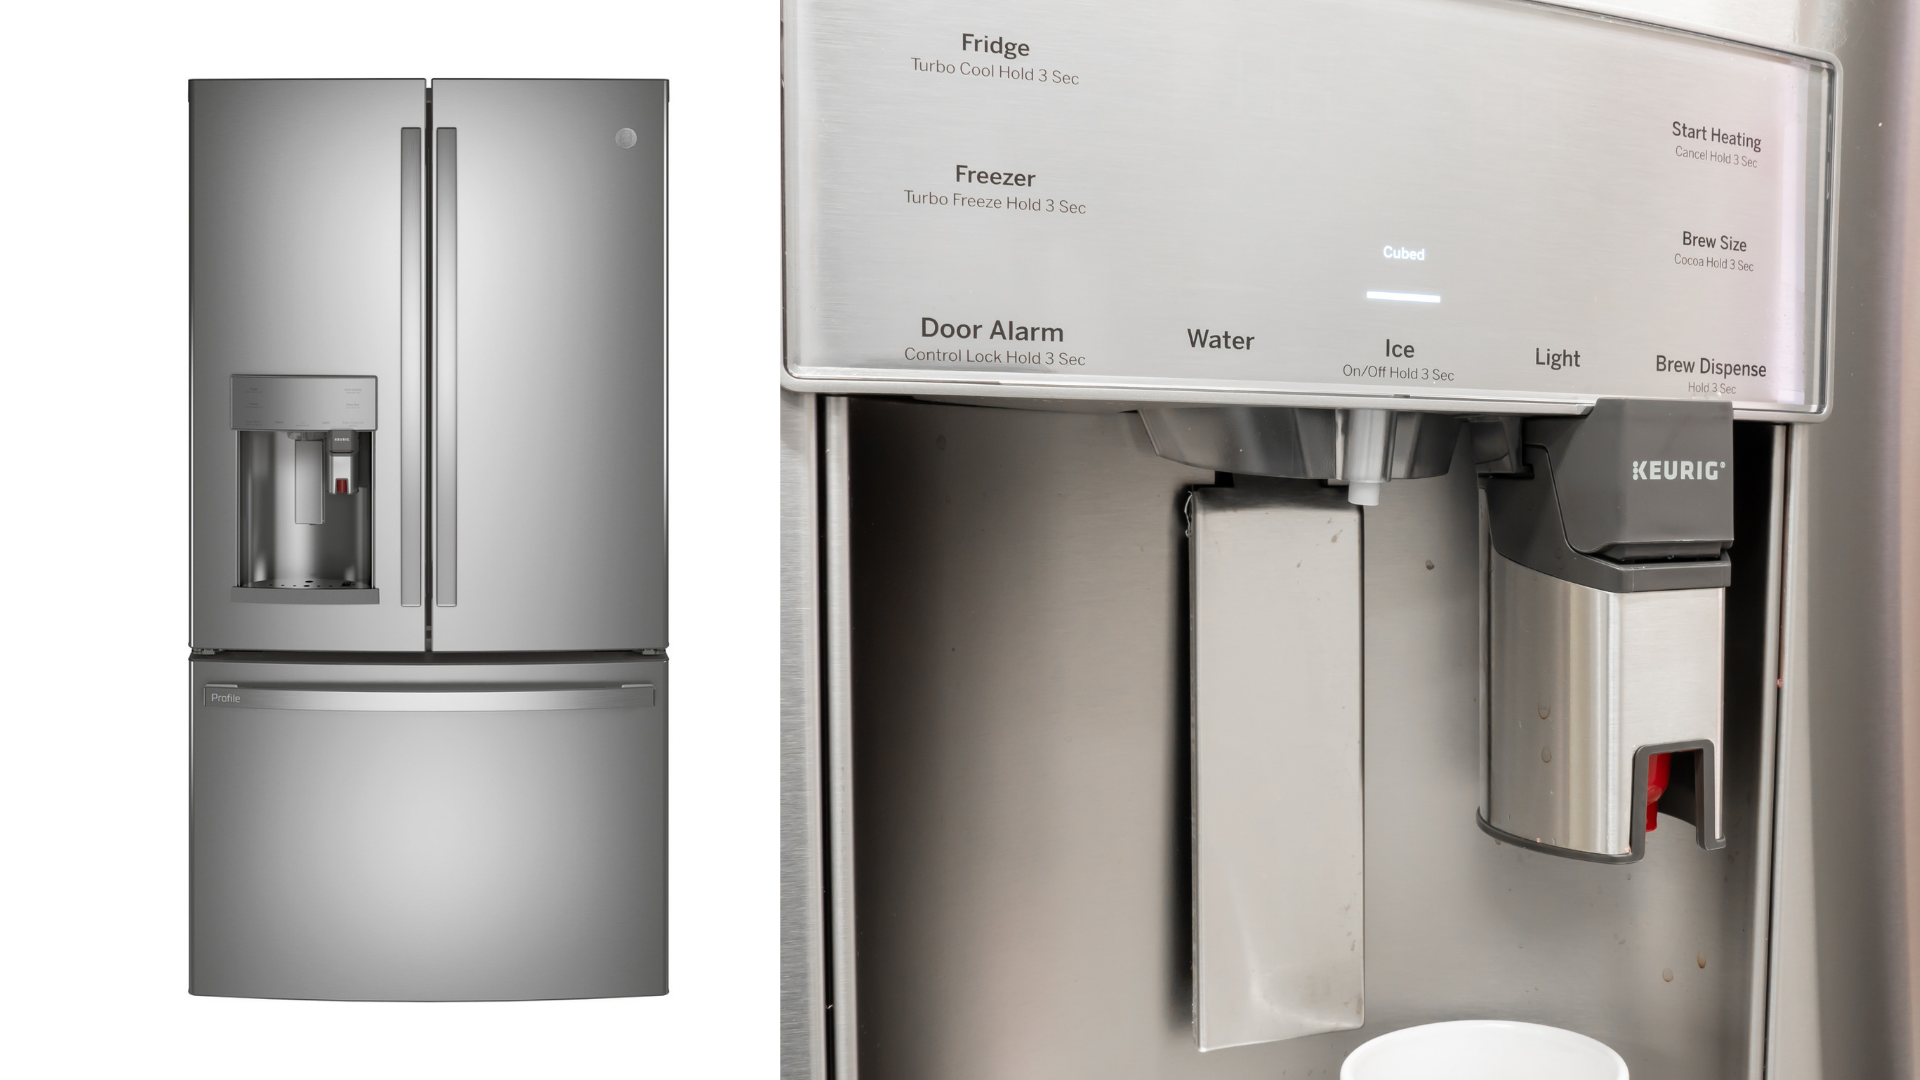 Keeping Cool with Style: The GE Profile Refrigerator Review